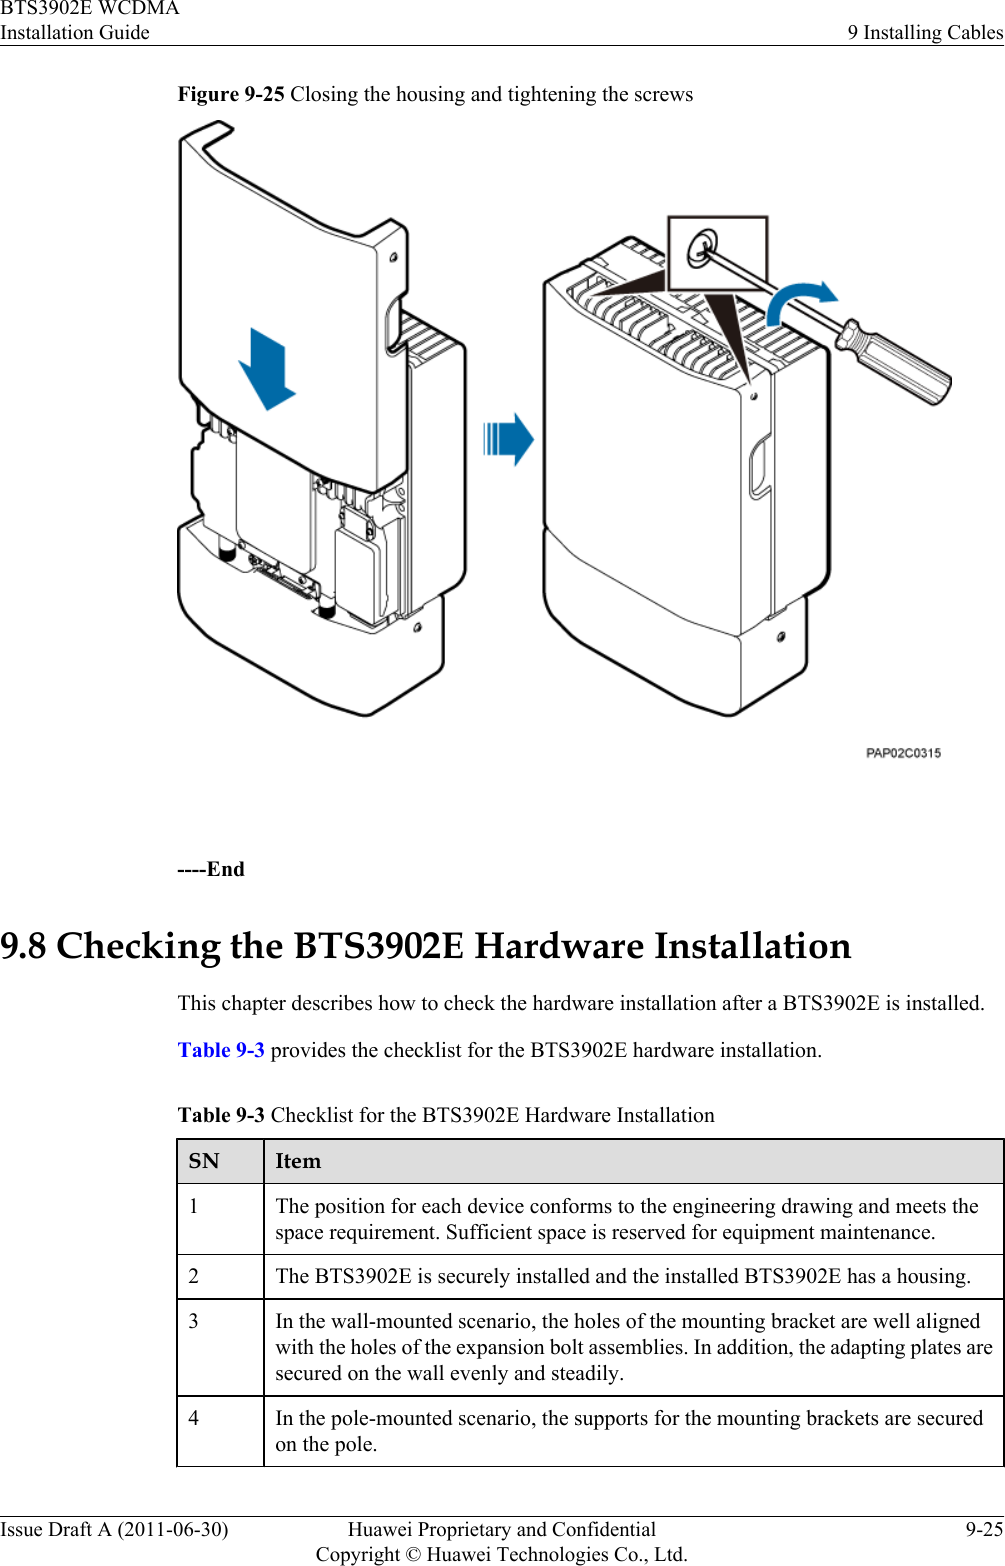 Figure 9-25 Closing the housing and tightening the screws ----End9.8 Checking the BTS3902E Hardware InstallationThis chapter describes how to check the hardware installation after a BTS3902E is installed.Table 9-3 provides the checklist for the BTS3902E hardware installation.Table 9-3 Checklist for the BTS3902E Hardware InstallationSN Item1The position for each device conforms to the engineering drawing and meets thespace requirement. Sufficient space is reserved for equipment maintenance.2 The BTS3902E is securely installed and the installed BTS3902E has a housing.3 In the wall-mounted scenario, the holes of the mounting bracket are well alignedwith the holes of the expansion bolt assemblies. In addition, the adapting plates aresecured on the wall evenly and steadily.4 In the pole-mounted scenario, the supports for the mounting brackets are securedon the pole.BTS3902E WCDMAInstallation Guide 9 Installing CablesIssue Draft A (2011-06-30) Huawei Proprietary and ConfidentialCopyright © Huawei Technologies Co., Ltd.9-25